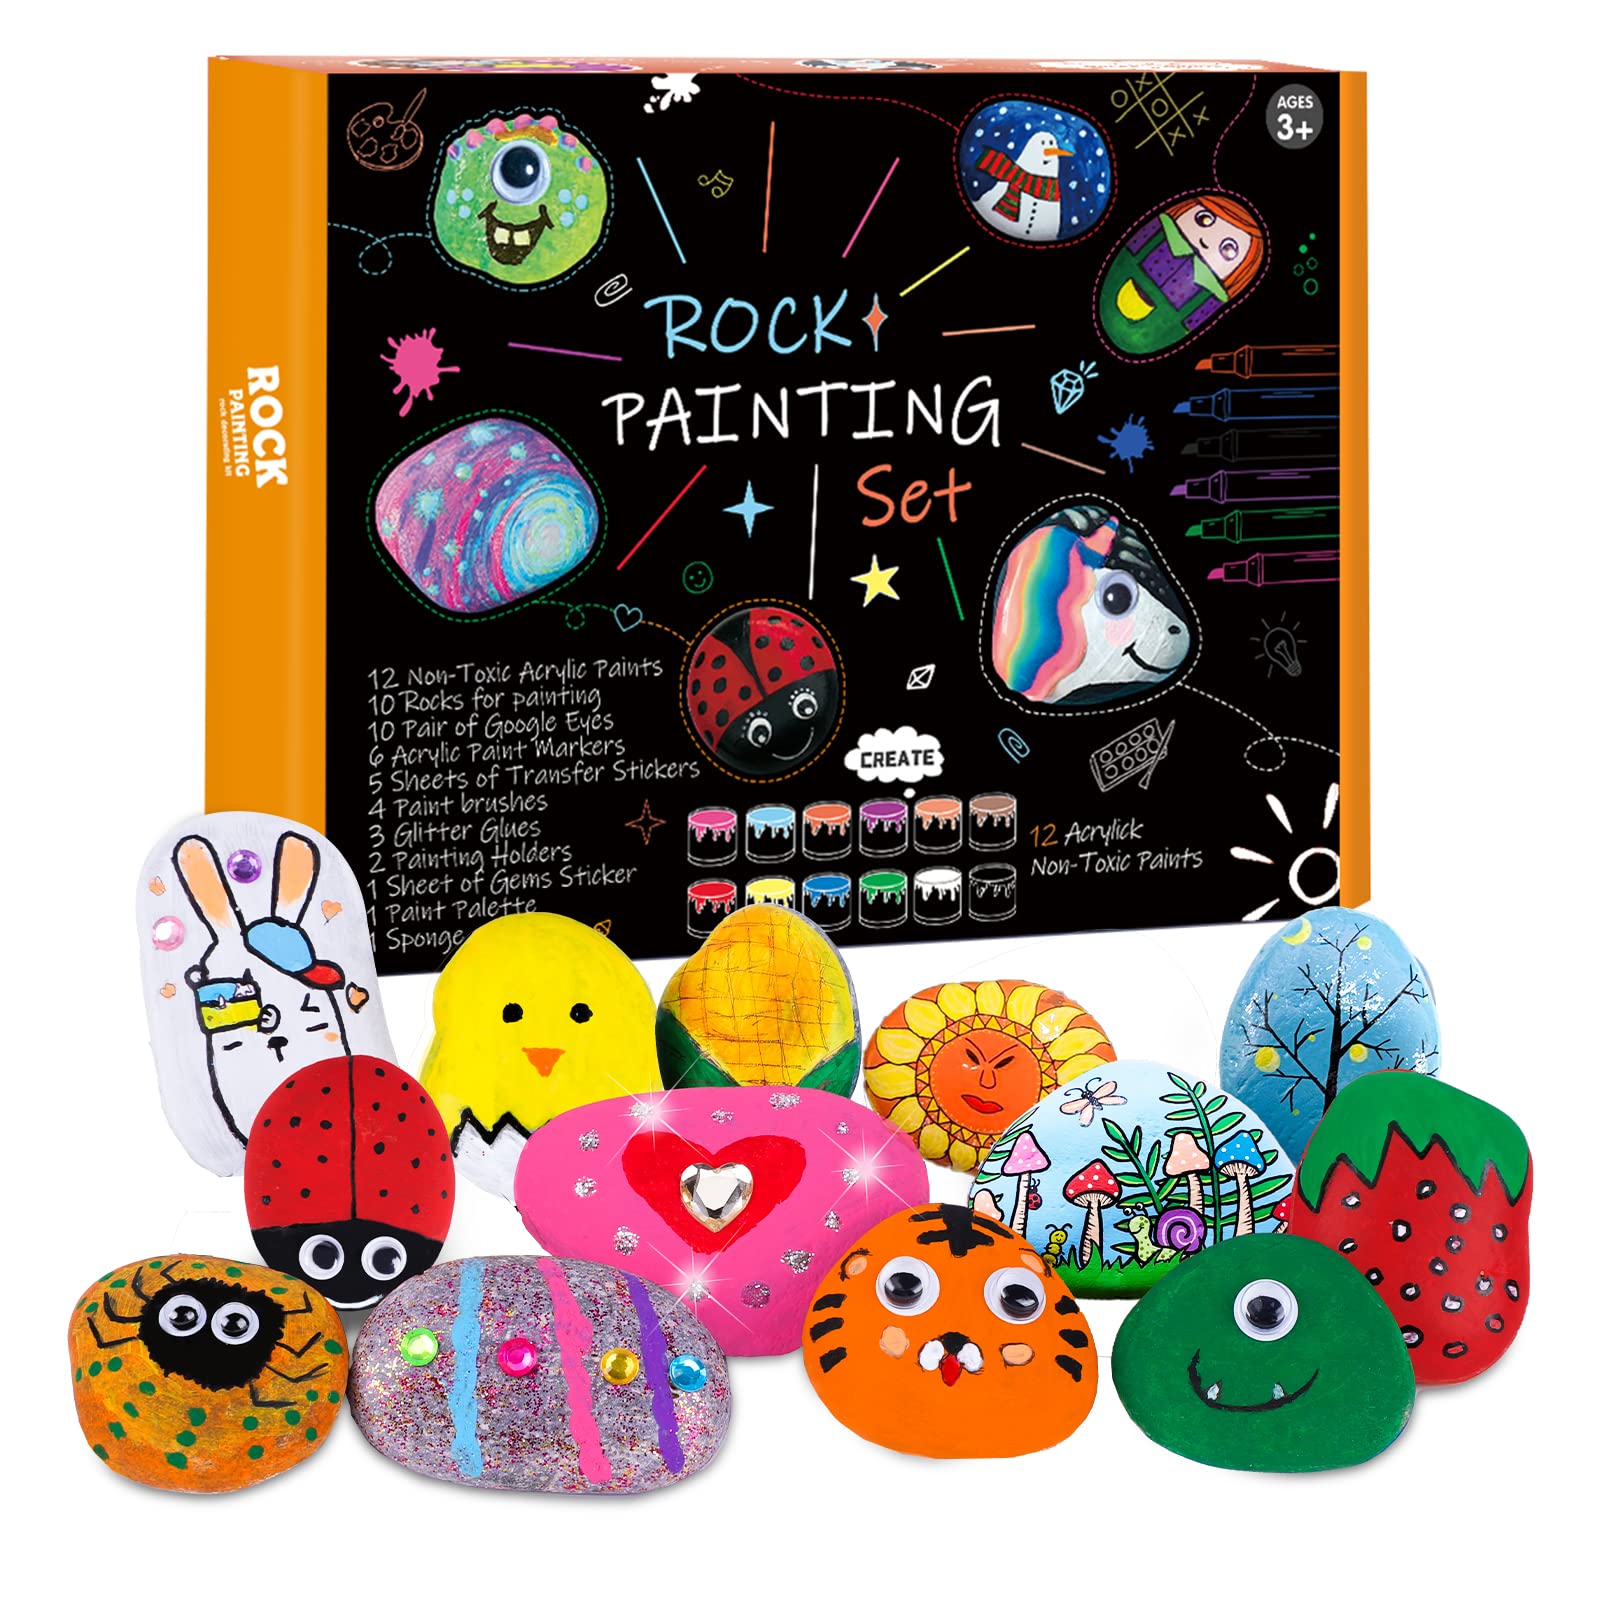 YIFUHH creative Rock Painting Kit for Kids, Arts and crafts for Boys&girls  Age 6-12Acrylic Paint, Waterproof Markers, gems-Kids Paintin